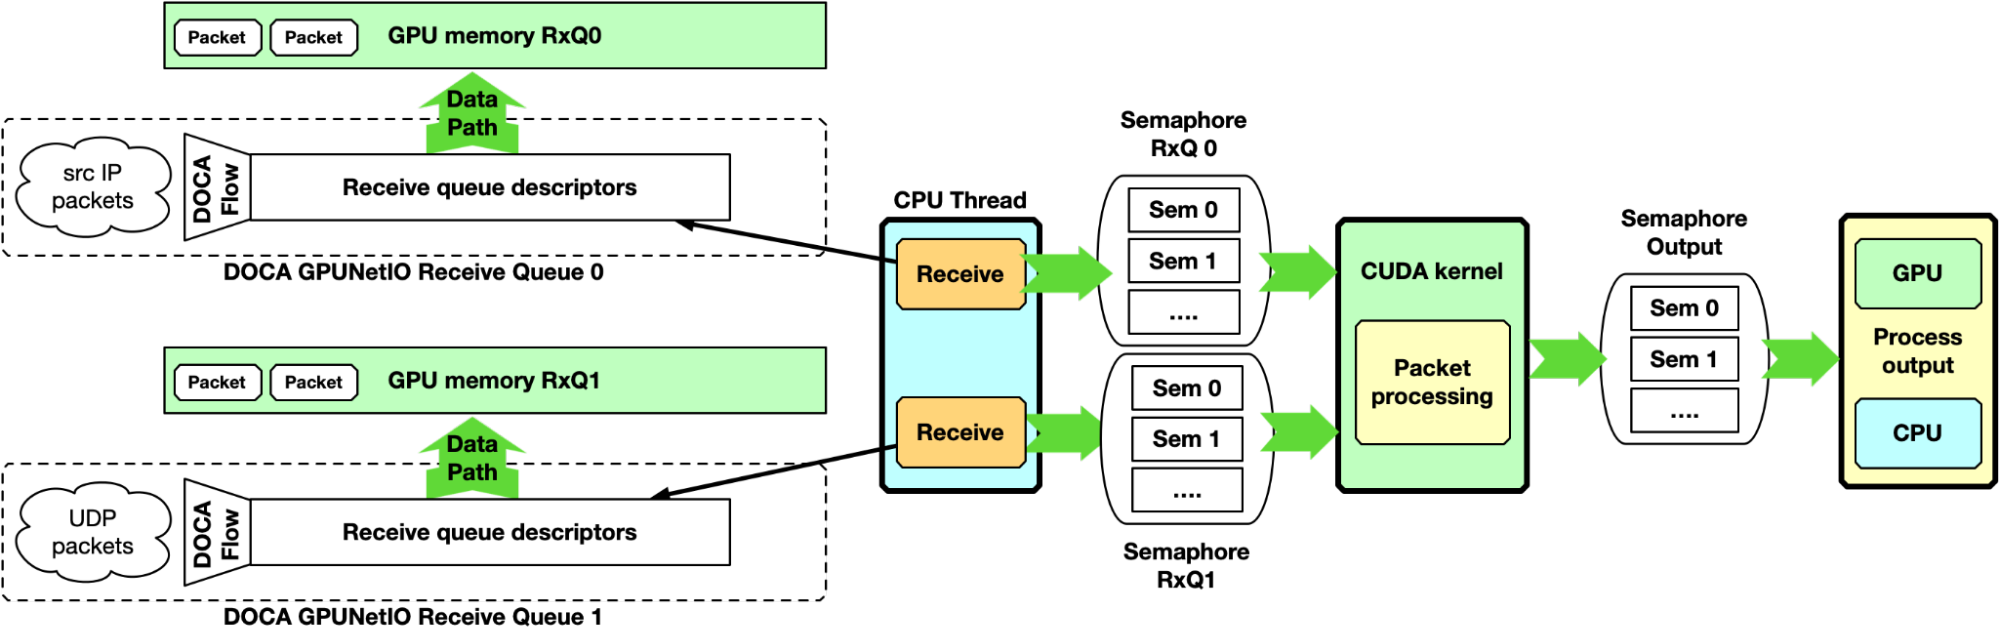 Graphic showing GPU packet processing pipeline with CPU receiving packets in GPU memory and using DOCA GPUNetIO semaphore to notify the packet processing CUDA kernel about incoming packets. 